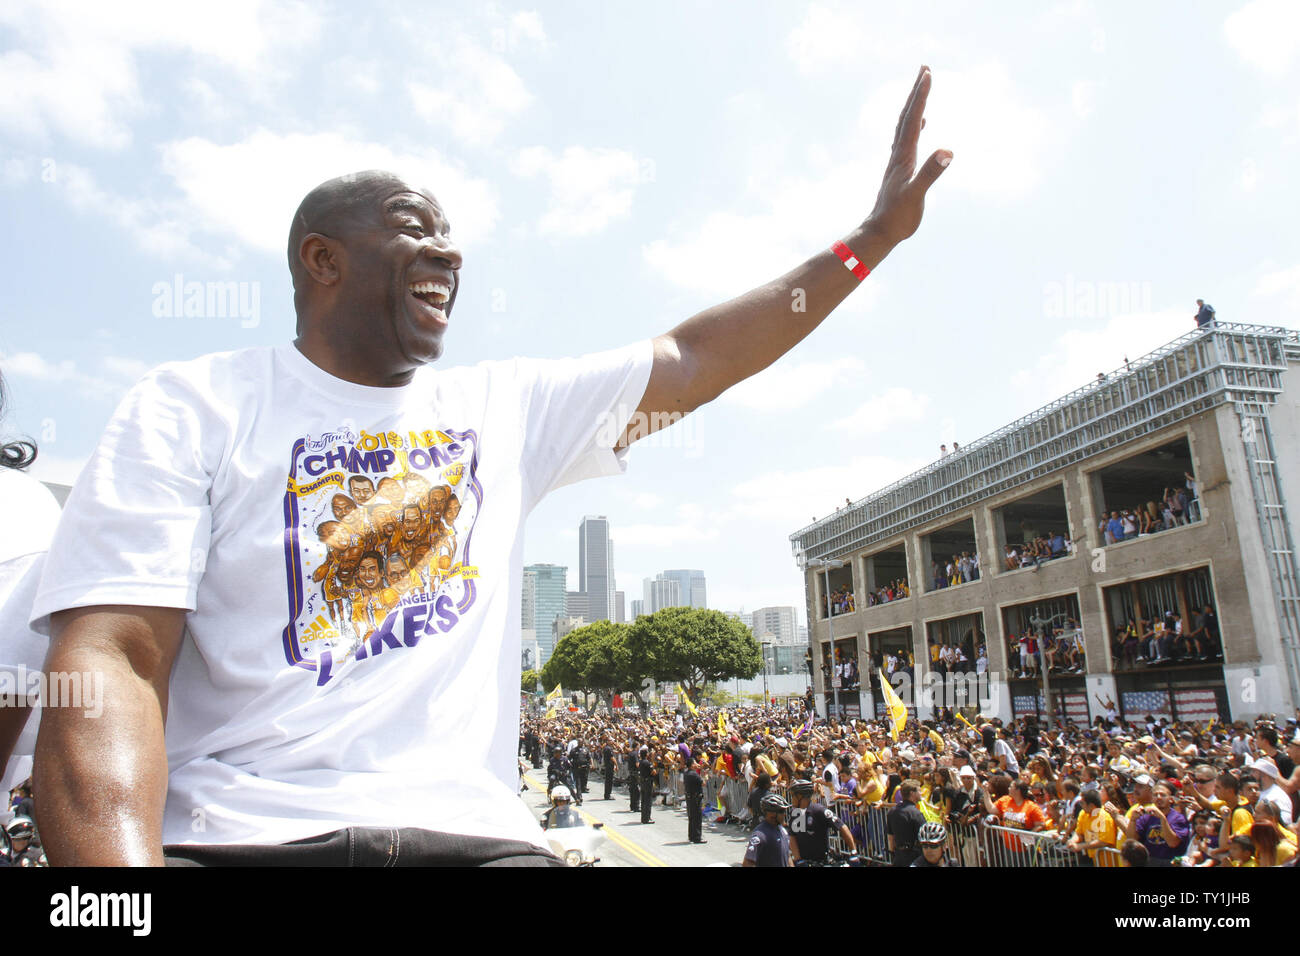 Magic Johnson waves to fans as the Los Angeles Lakers celebrate their NBA championship with a parade in Los Angeles on June 21, 2010. The Lakers defeated Celtics to win the championship .